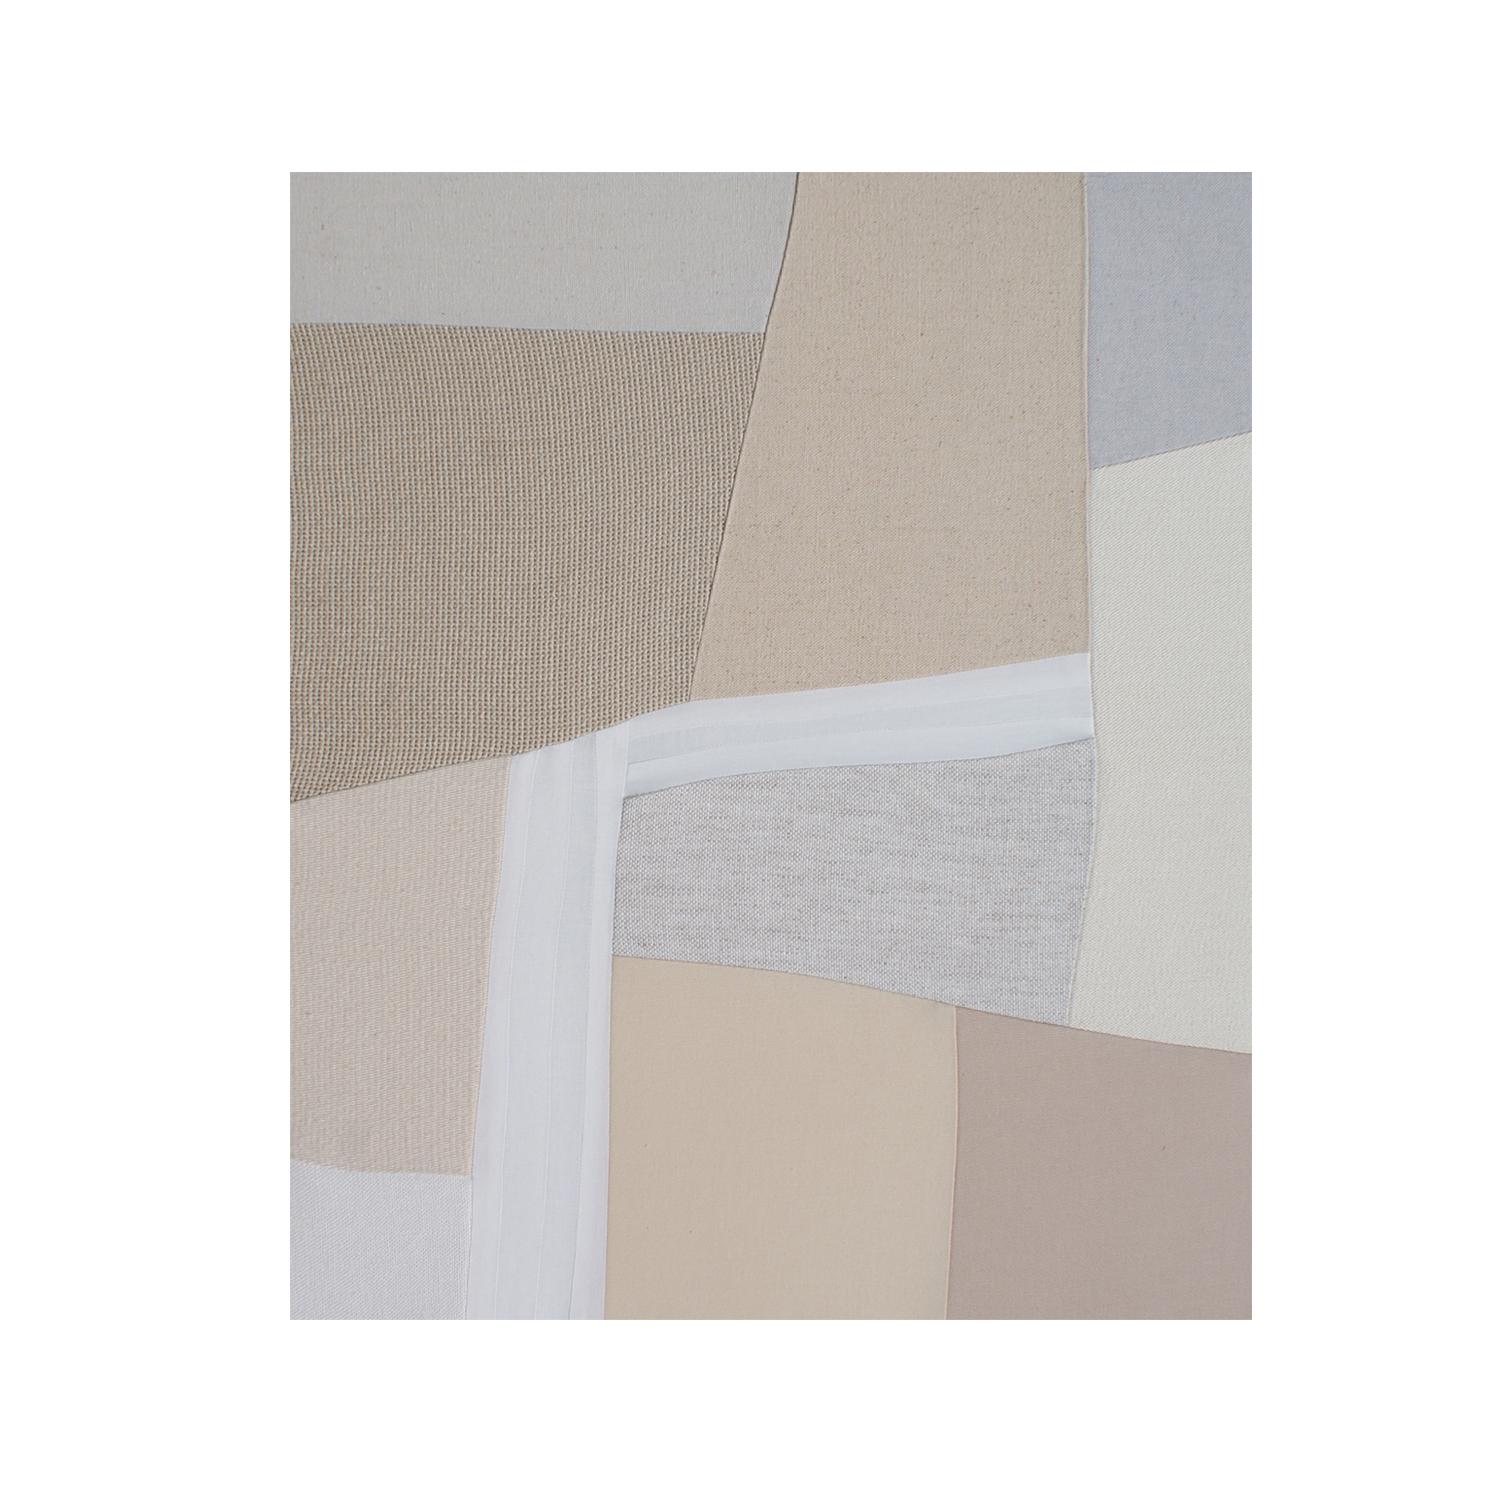 Moving On (textile art taupe neutrals greys beige sand fabric abstract geometric - Mixed Media Art by Meike Legler